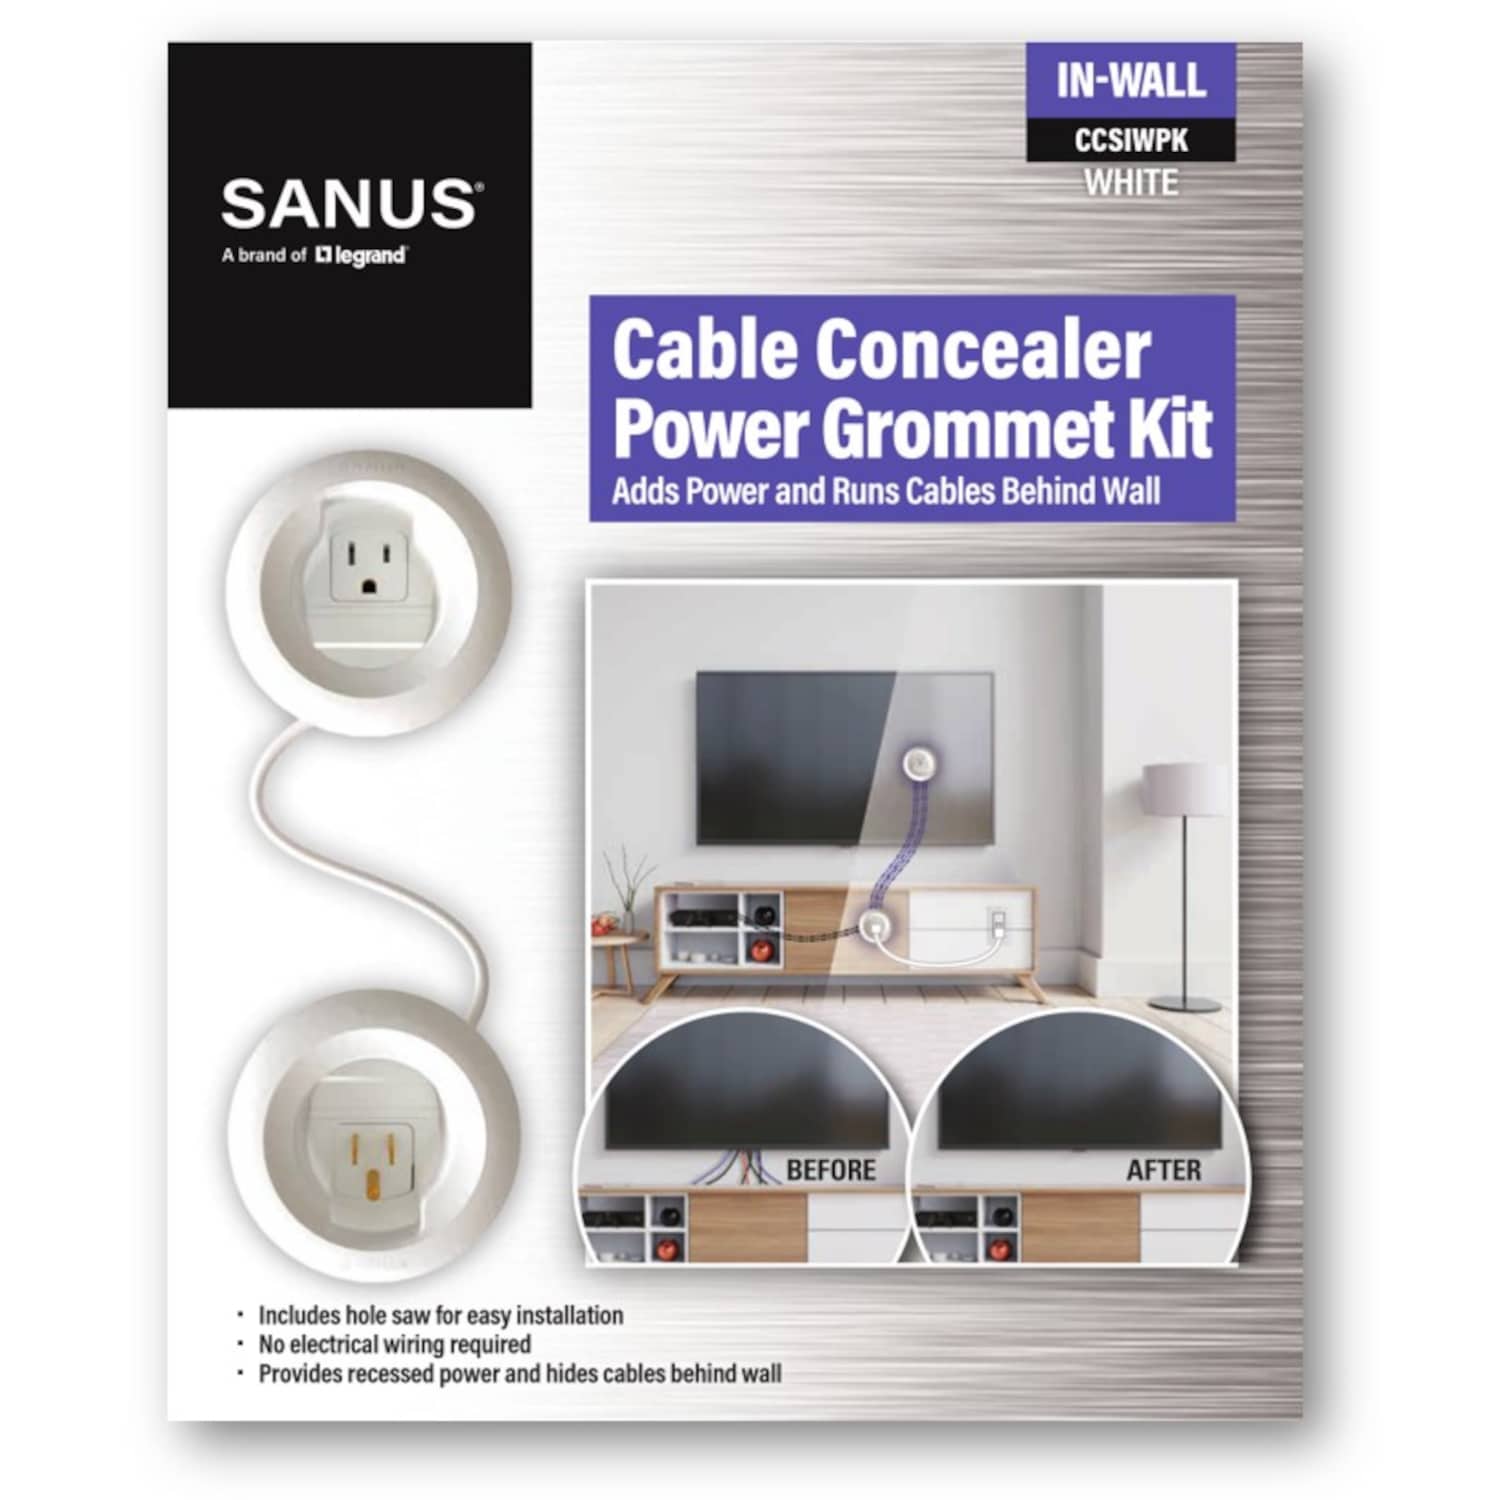 Sanus On-Wall Cable Concealer High Capacity Cord Cover Kit for